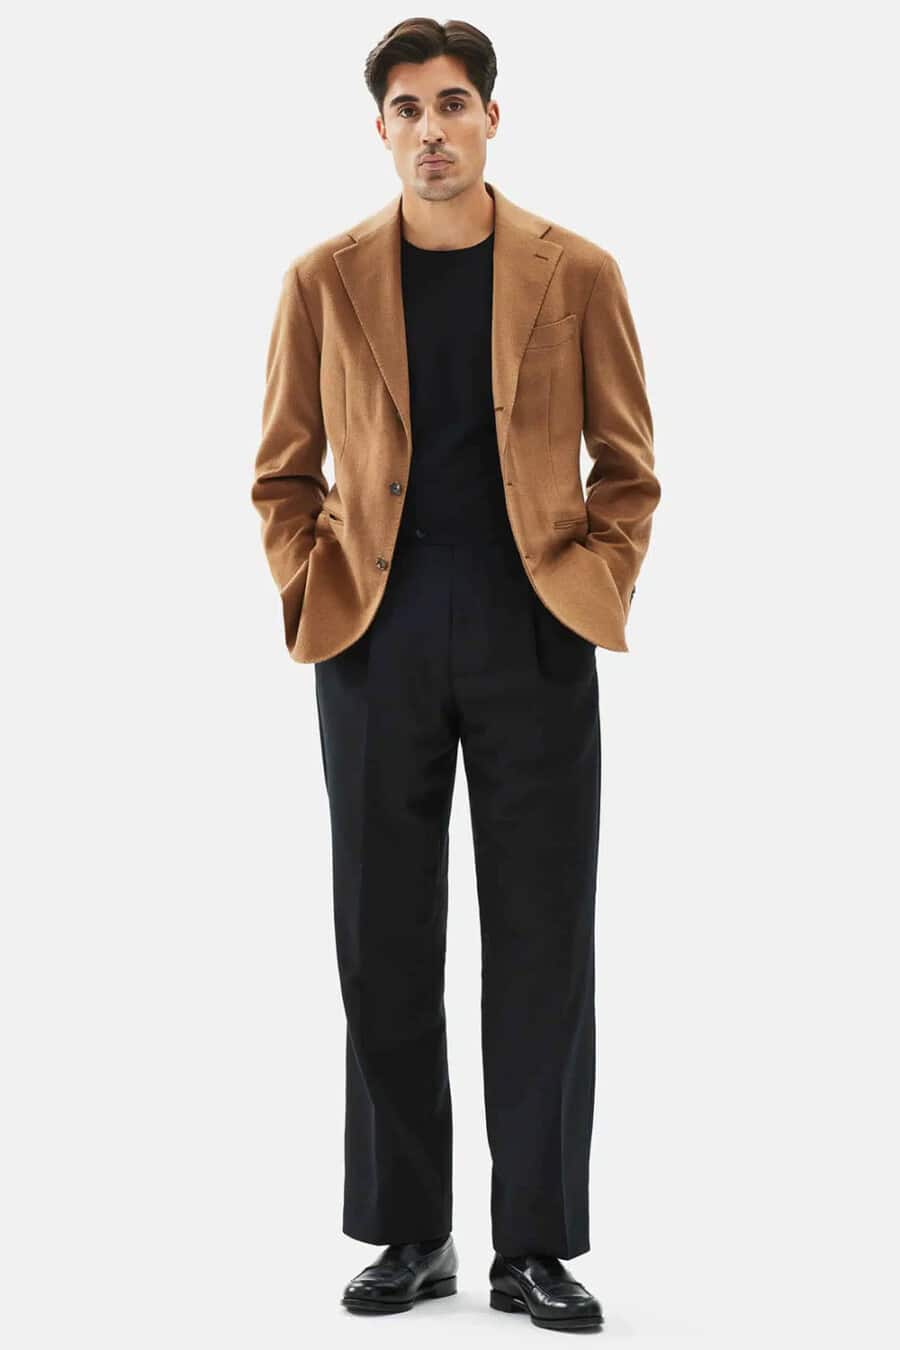 Men's wide-leg black pants, tucked in black T-shirt, tobacco brown blazer and black leather penny loafers smart-casual outfit